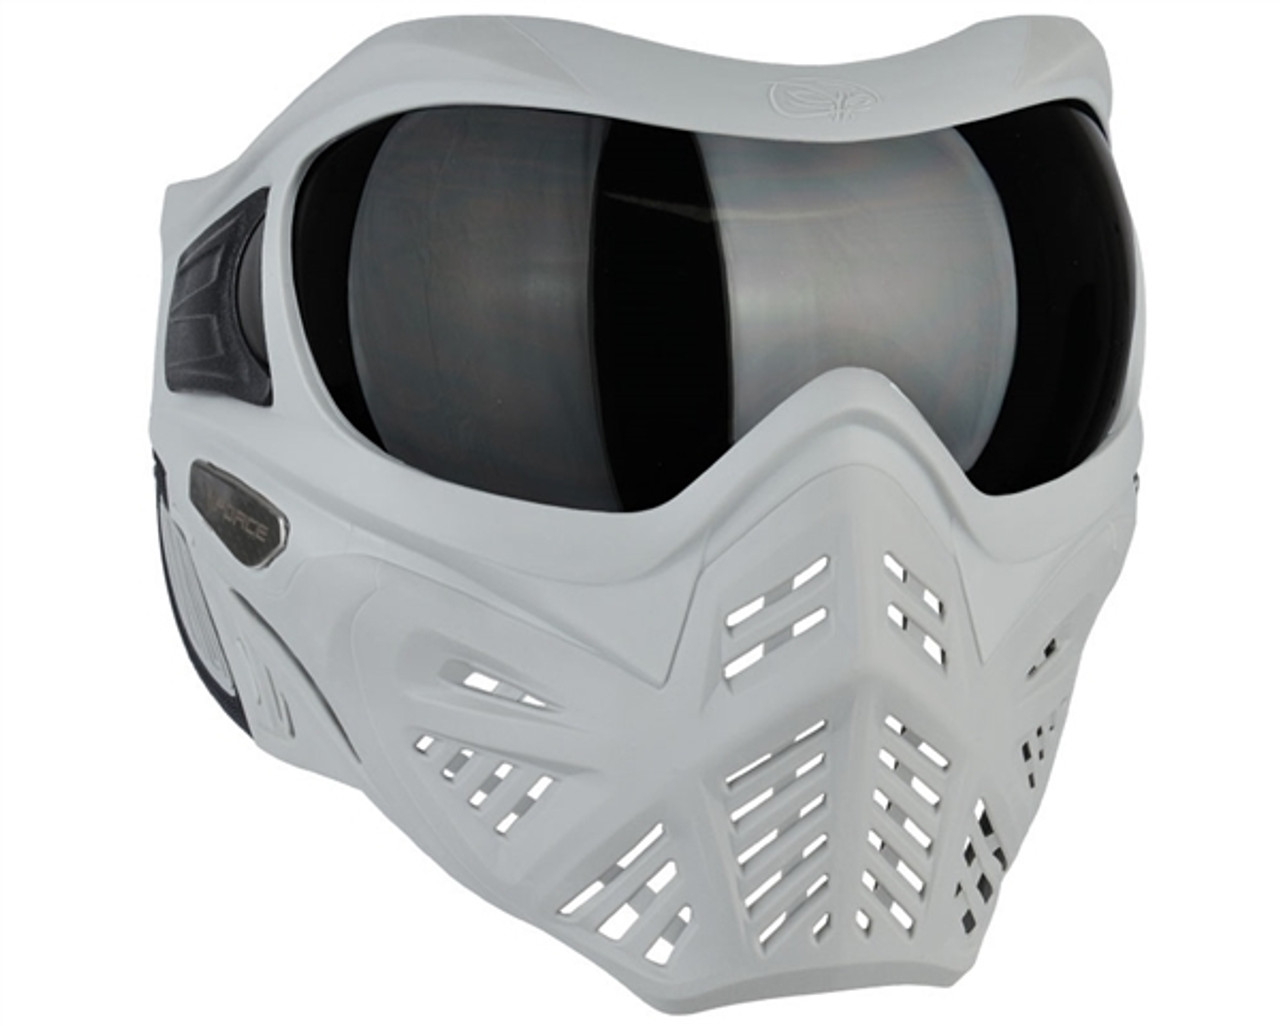 V-Force Grill 2.0 Paintball Mask/Goggle - Black/Black